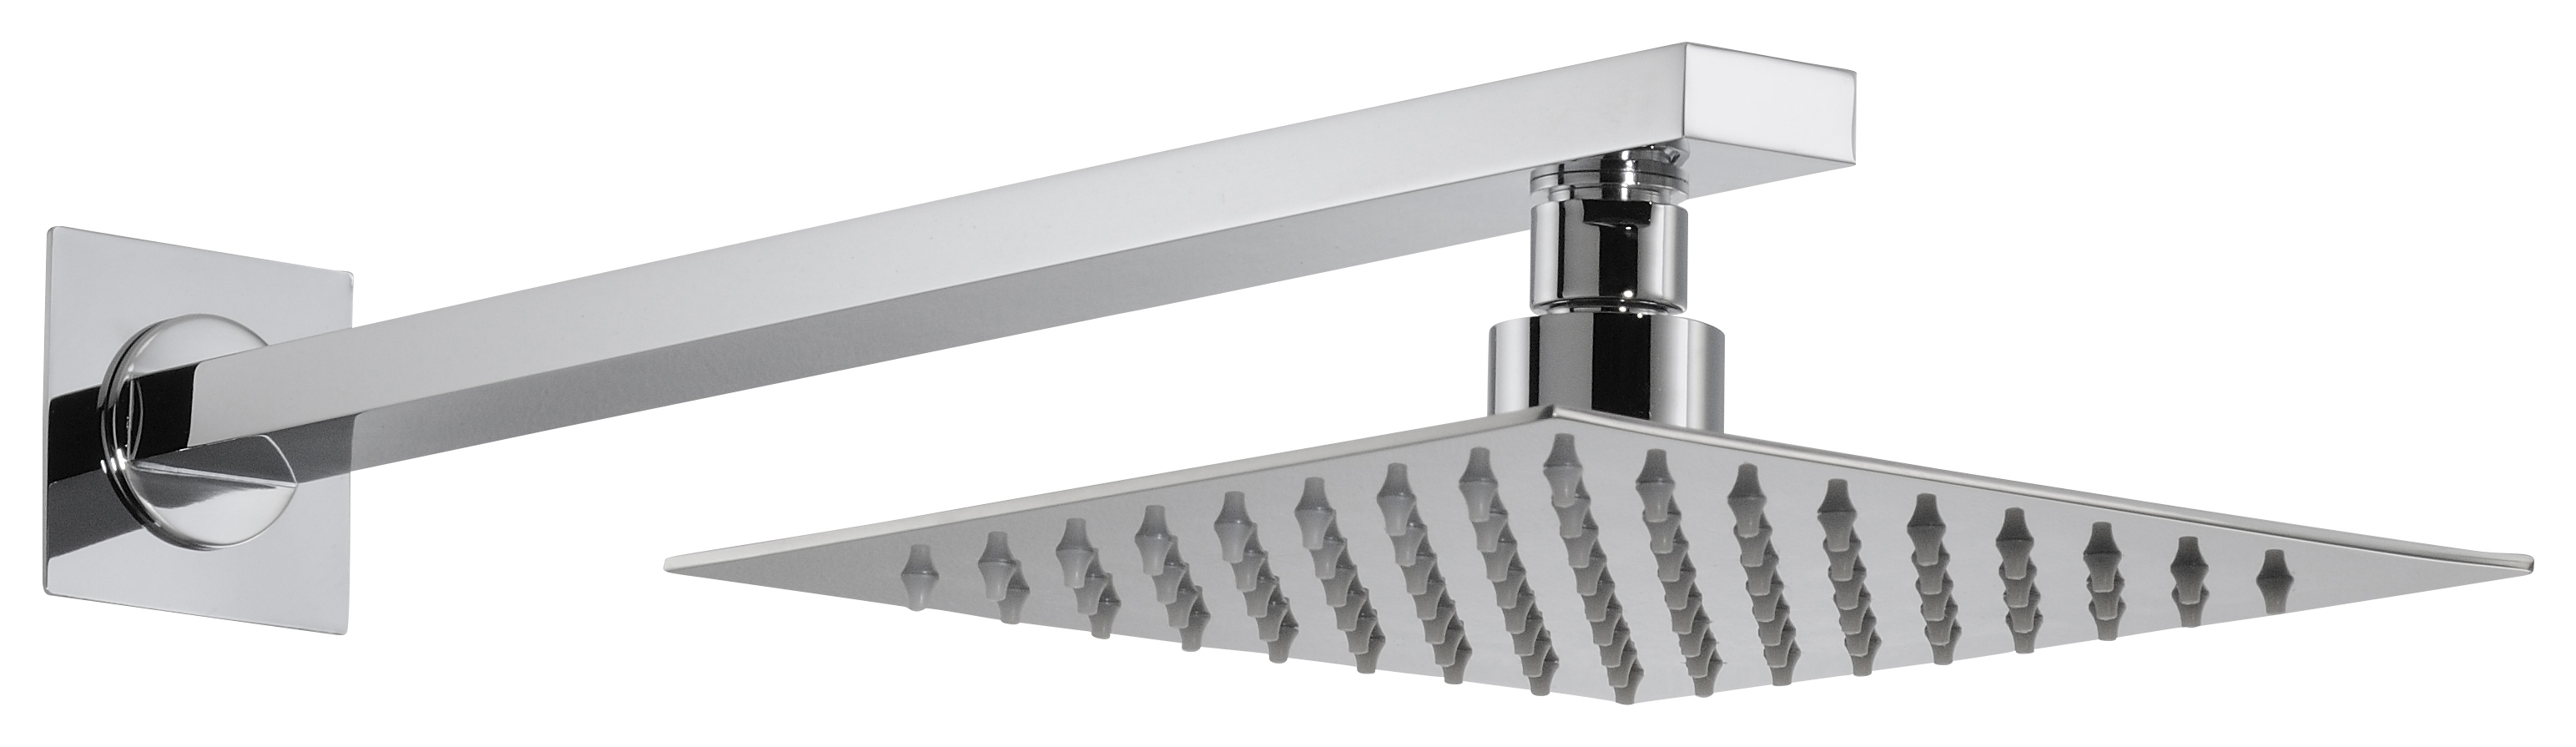 Image of Abode Storm Chrome Wall Mounted Square Shower Head & Arm - 200mm